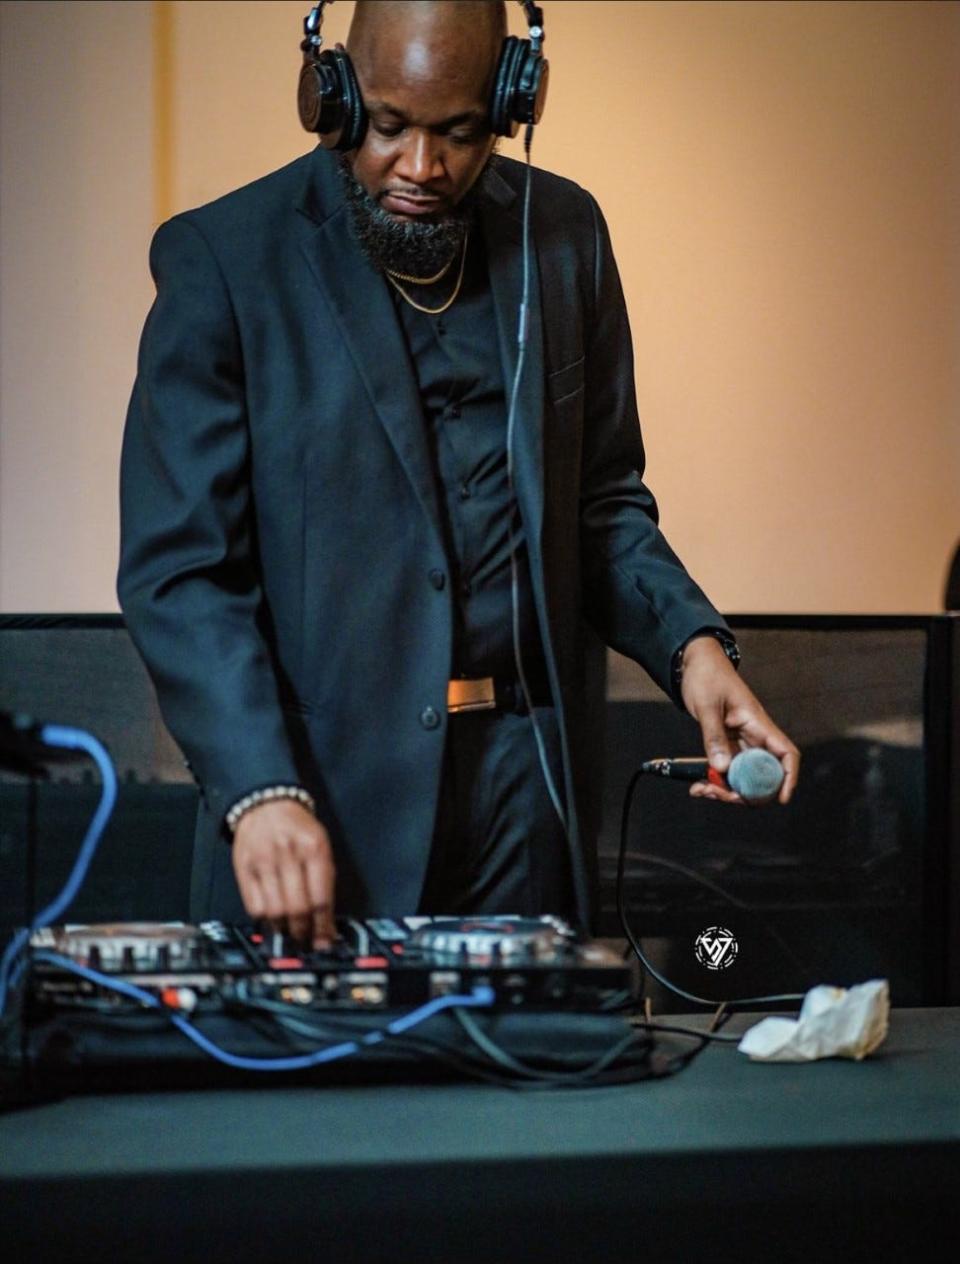 Dj Amp C "The Brand" at benefit gala at Petersburg Library Conference Center hosted by Don "DB Donamatrix" Brooks and his daughter Tuesdae Donyale on March 31, 2023.